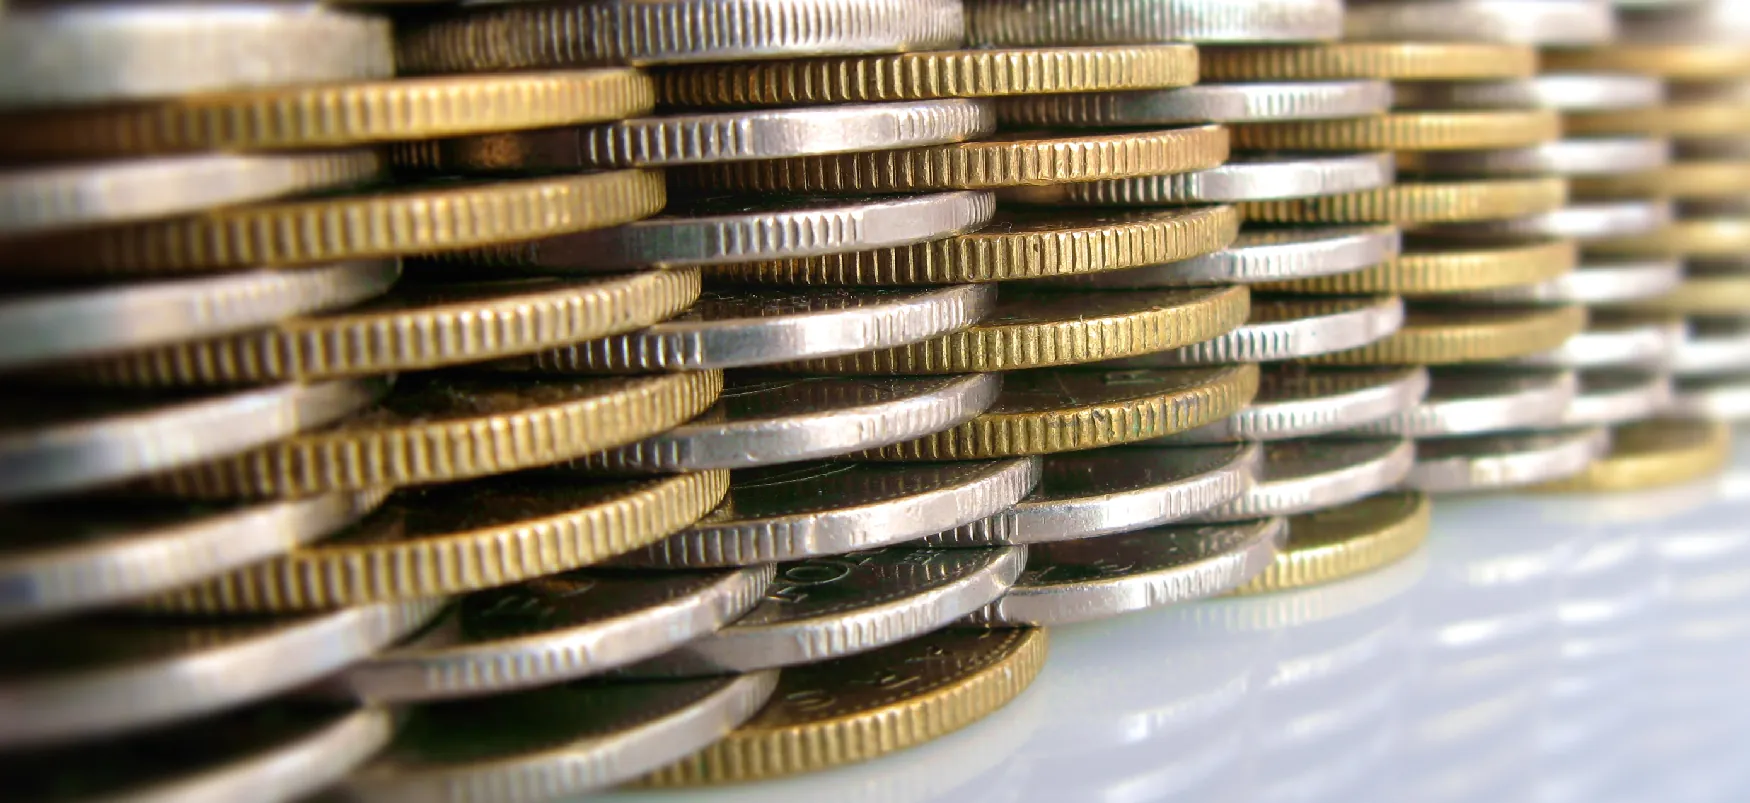 Two different types of coins are stacked together in a repeating pattern.